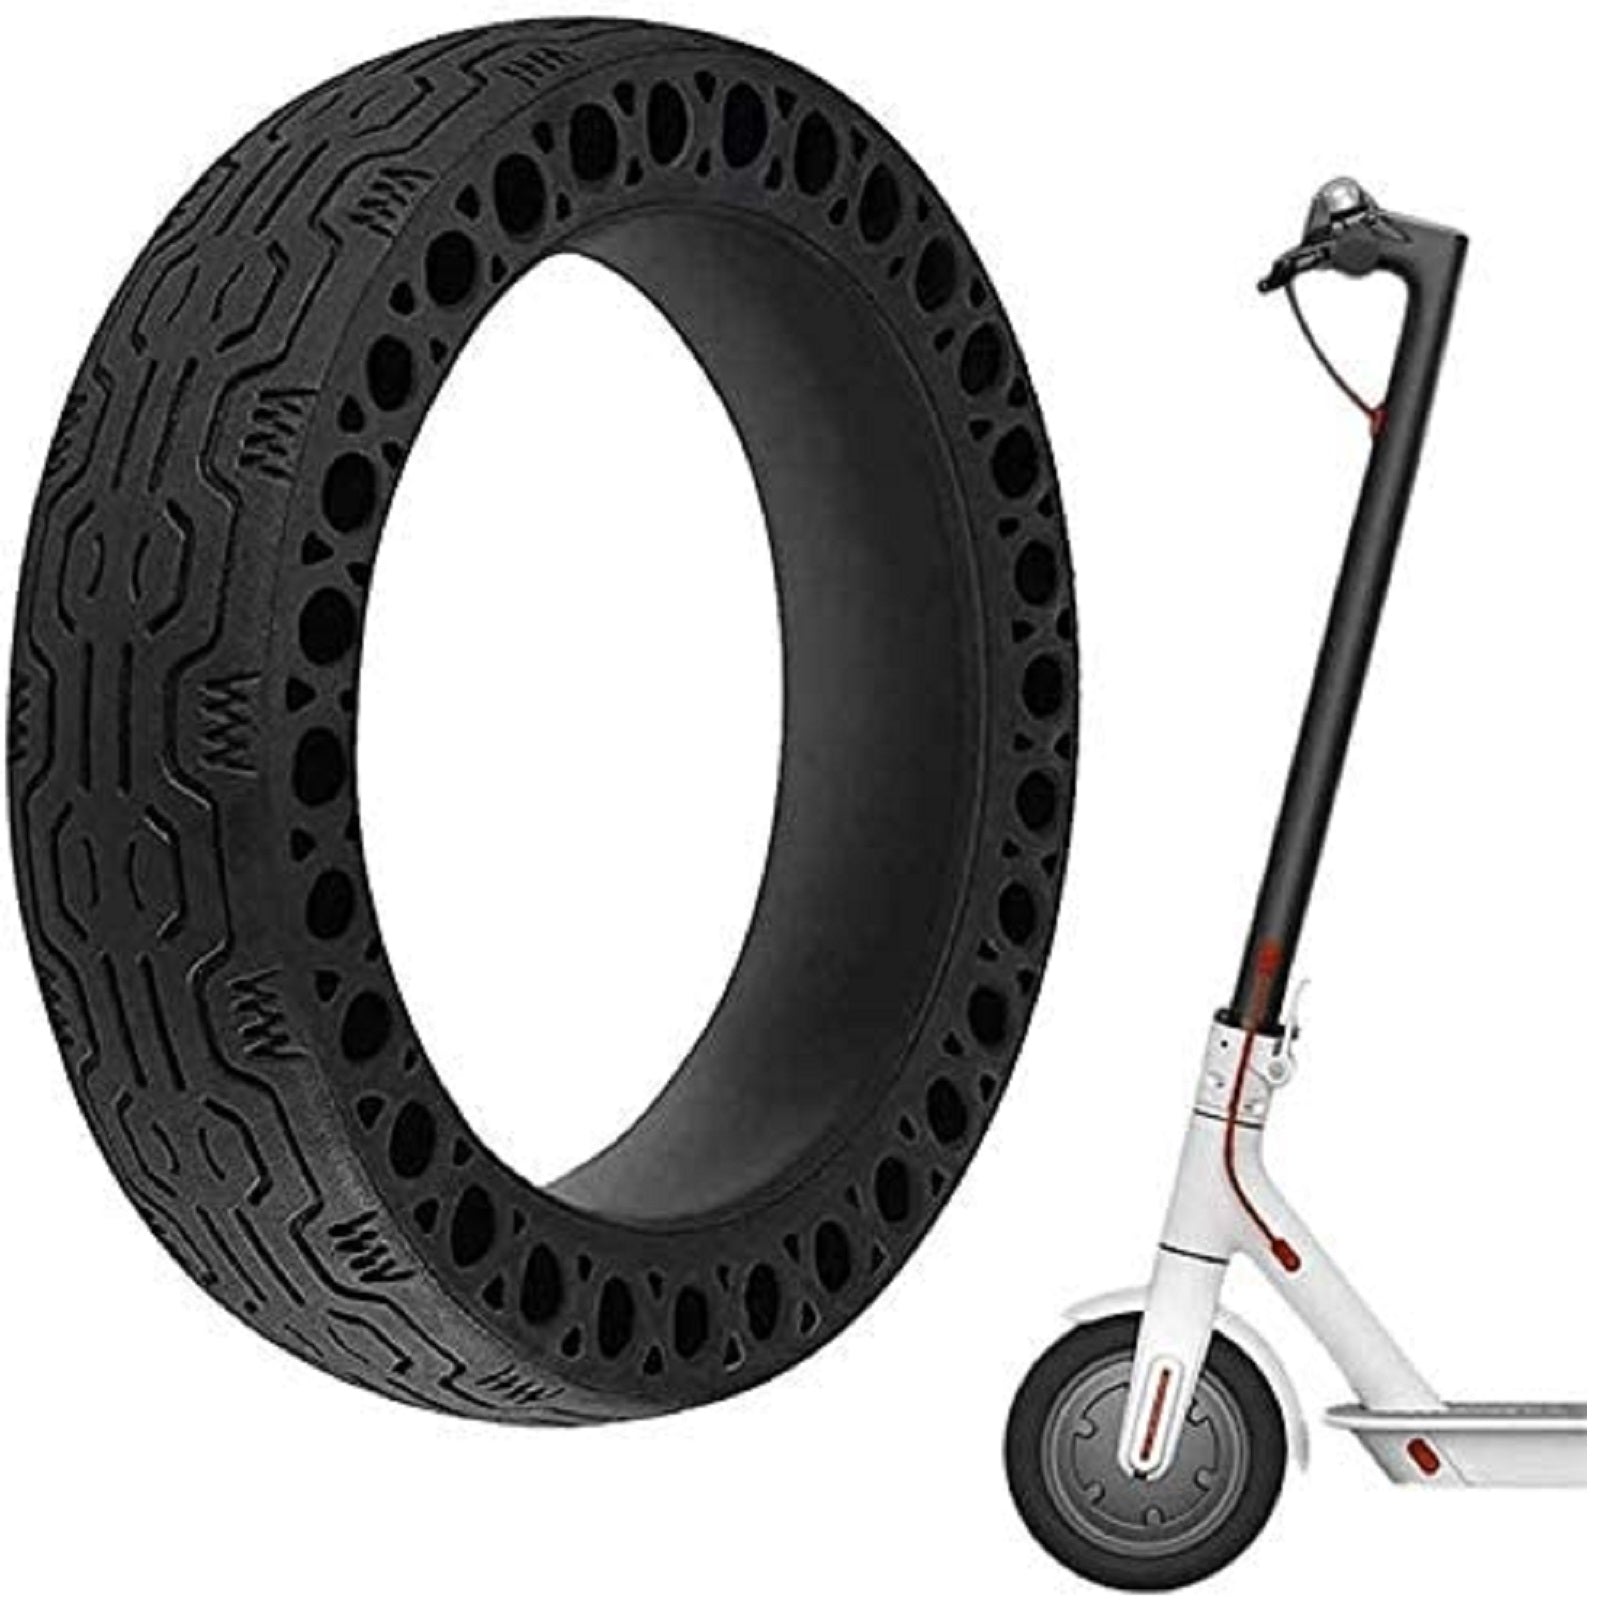 Geekbuying : 5TH WHEEL M2 Electric Scooter 8.5 Inch Honeycomb Tires (350W  Motor) at €235 from Europe & with free shipping - News by Xiaomi Miui Hellas